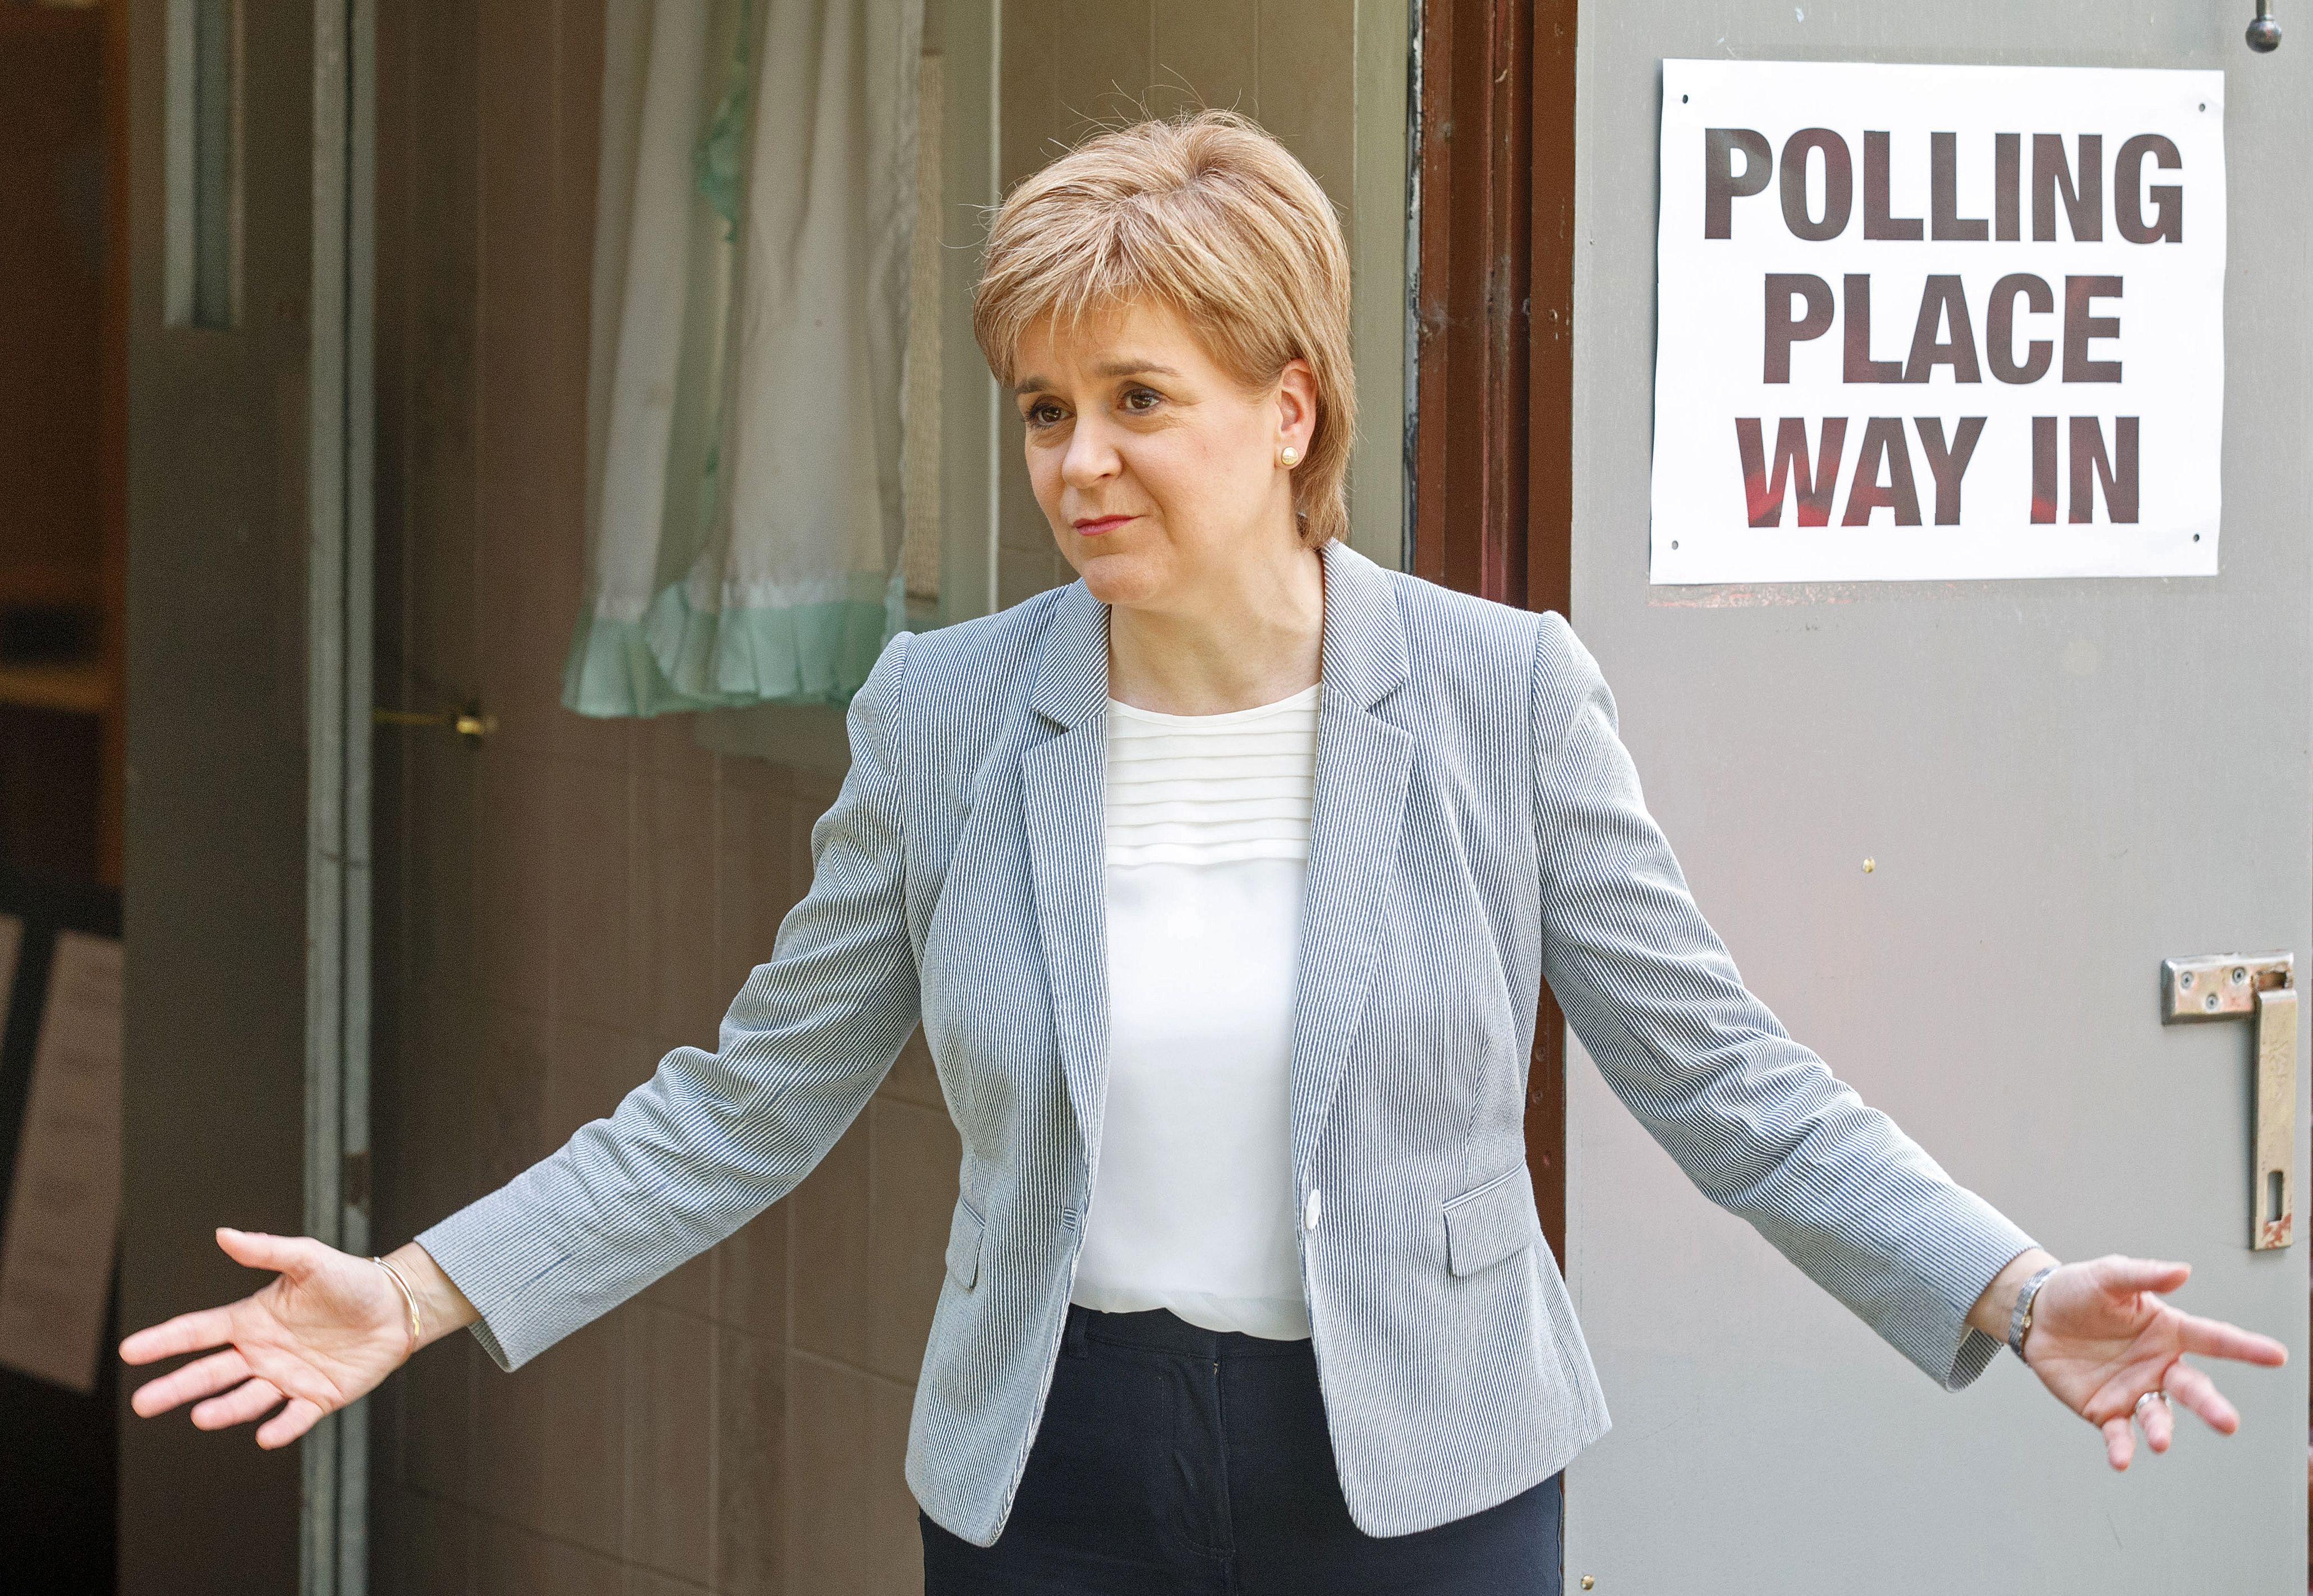 Scotland's First Minister and Leader of the Scottish National Party (SNP), Nicola Sturgeon, reacts as leaves after voting at a polling station at Broomhouse Community Hall in east Glasgow, on June 23, 2016.